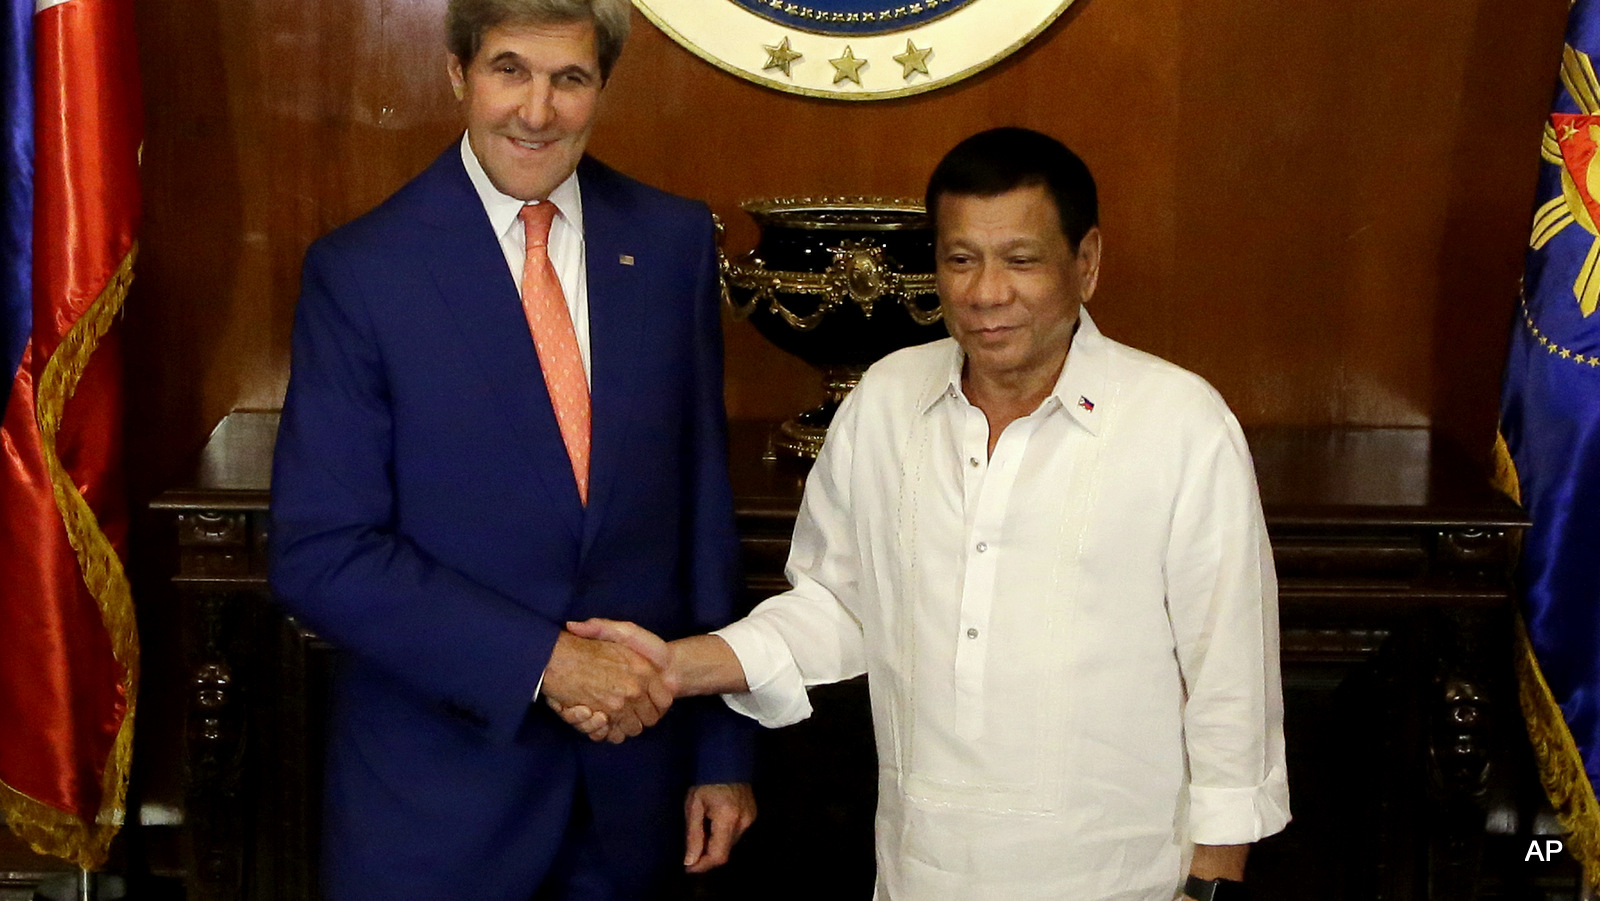 Philippine President Rodrigo Duterte, right, welcomes U.S. Secretary of State John Kerry during his visit at the Malacanang presidential palace in Manila, Philippines on Wednesday, July 27, 2016.